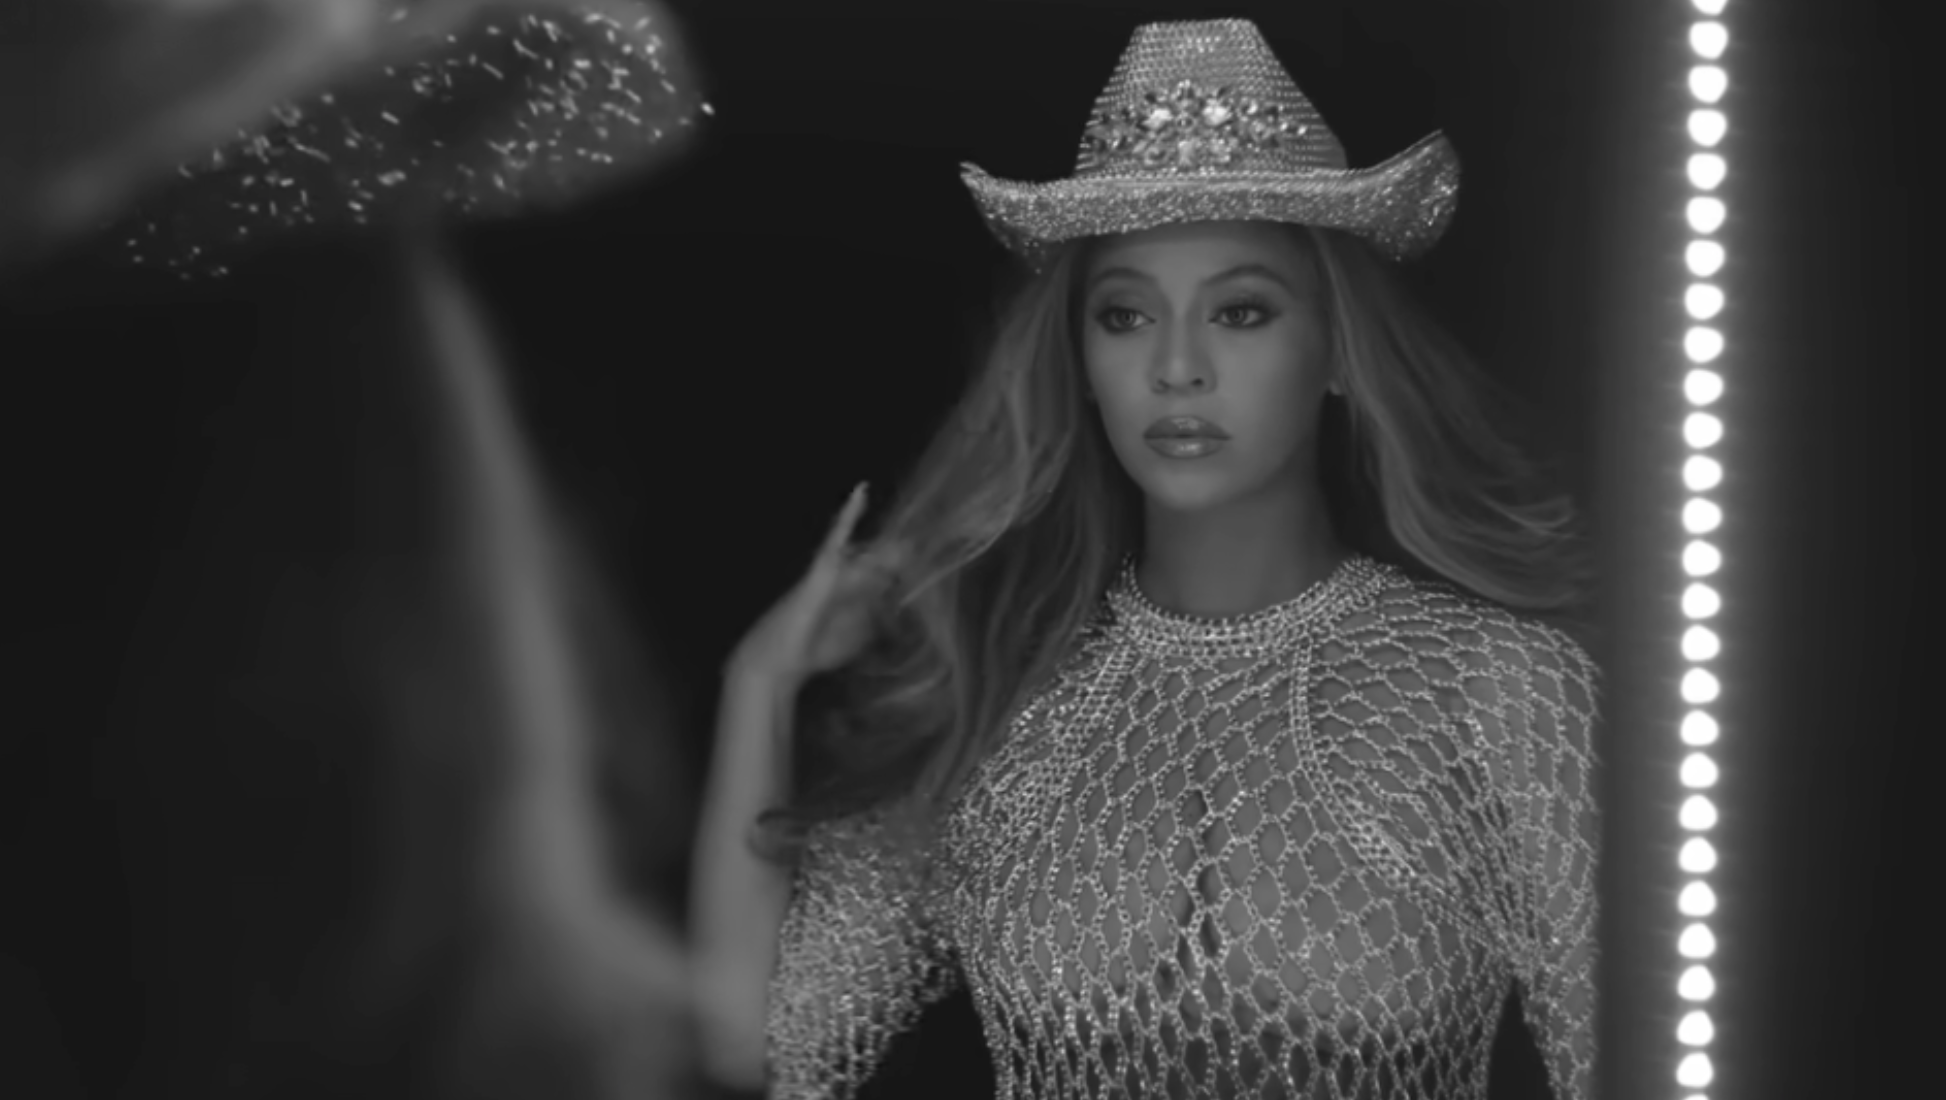 No, beyoncé’s new album is not country music